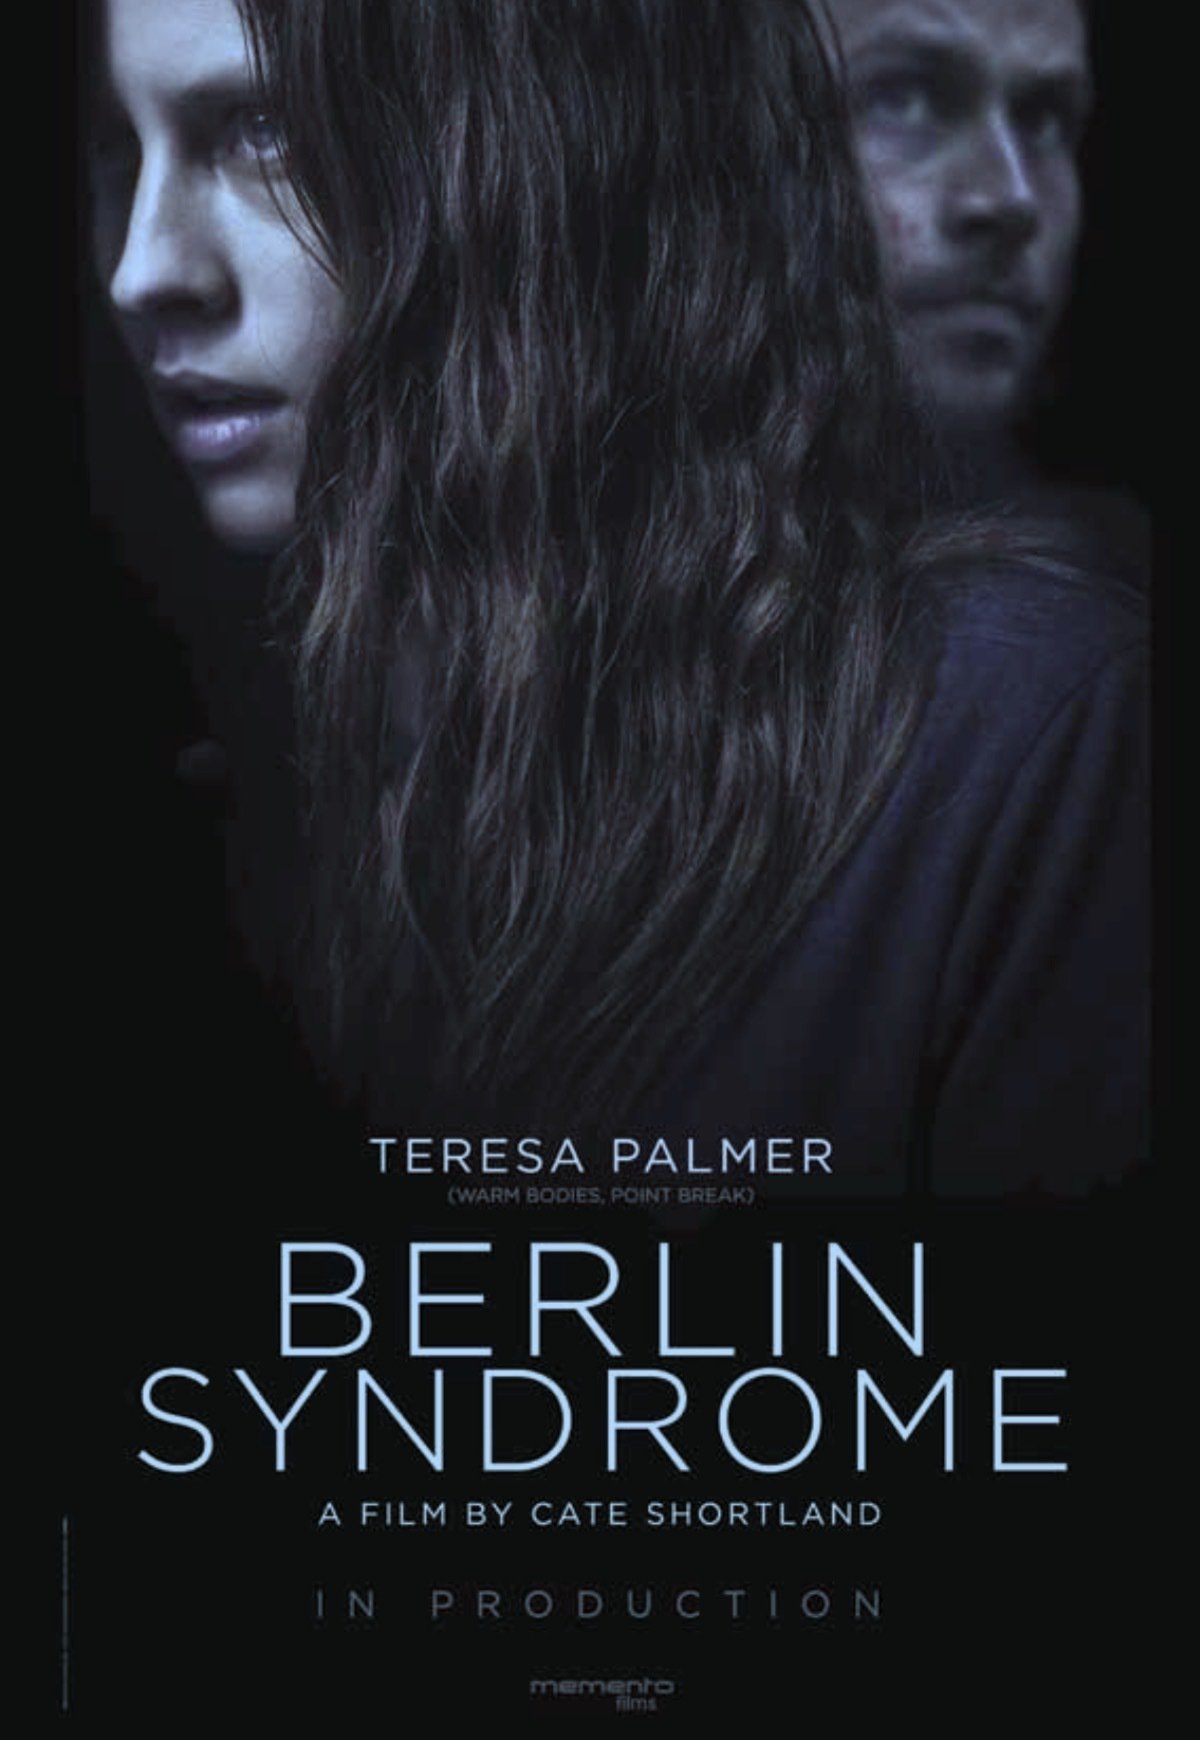  Berlin Syndrome (2016) Poster 